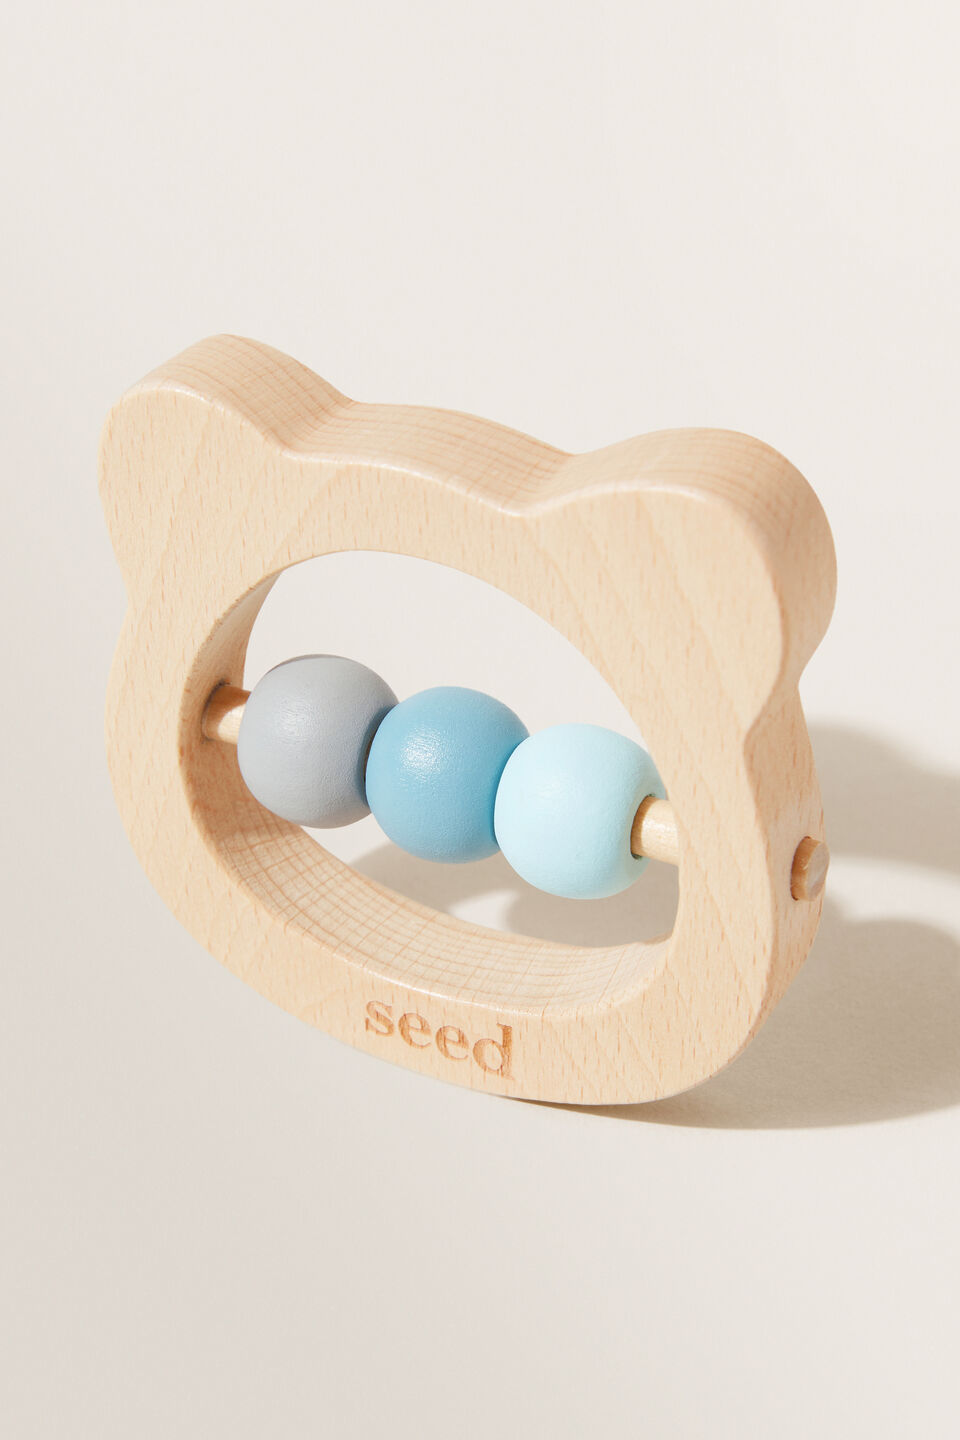 Seed Wooden Rattle  Blue